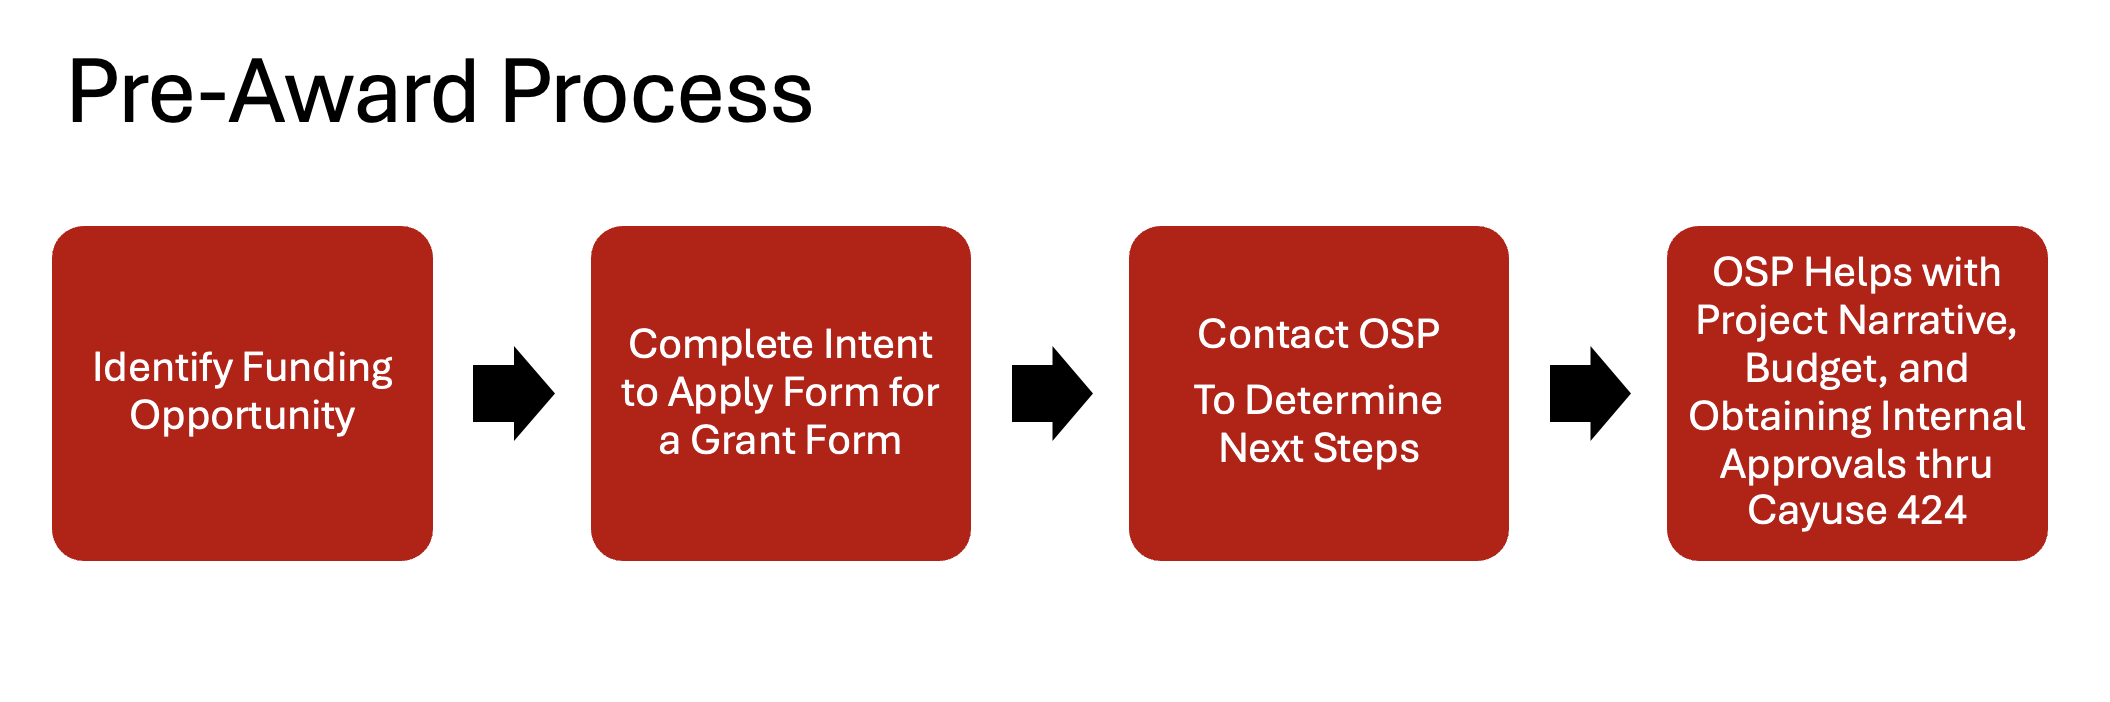  Identify Funding Opportunity Complete Intent tPre-Award process graphic showing steps as follows--o Apply Form for a Grant Form, Contact OSP To Determine Next Steps, OSP Helps with Project Narrative, Budget, and Obtaining, Internal Approvals thru Cayuse 424